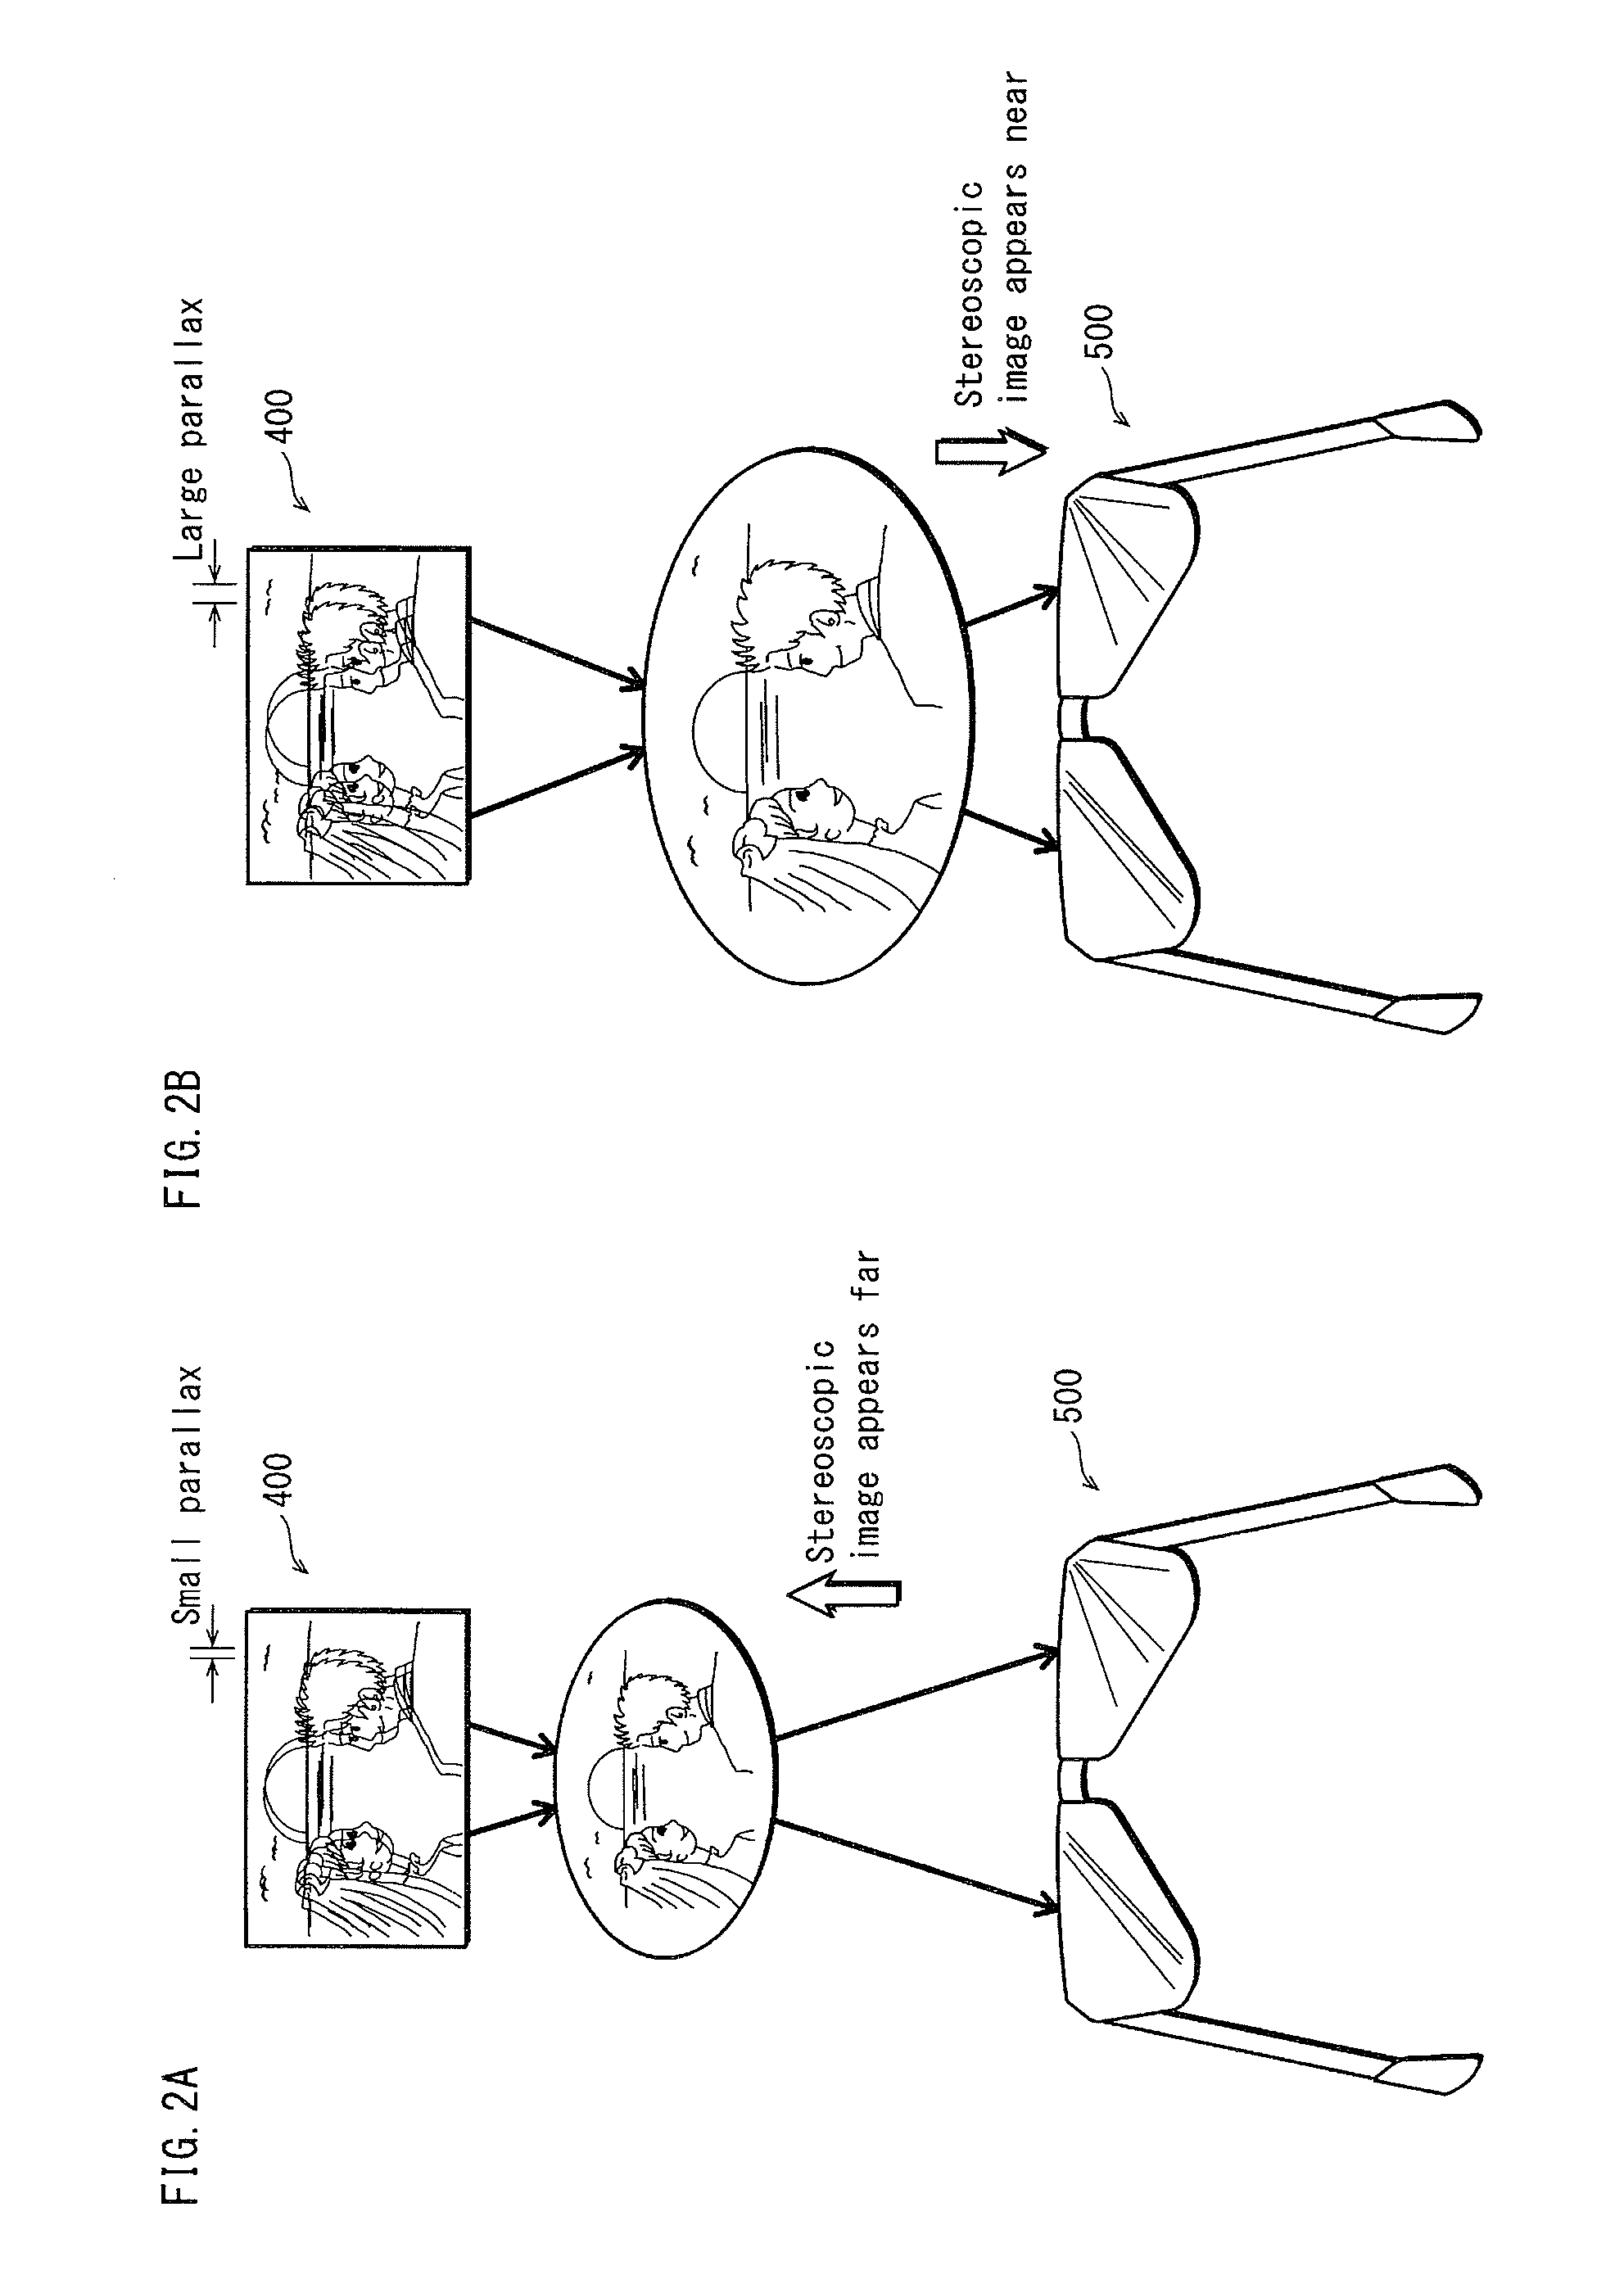 Playback device for stereoscopic viewing, integrated circuit, and program